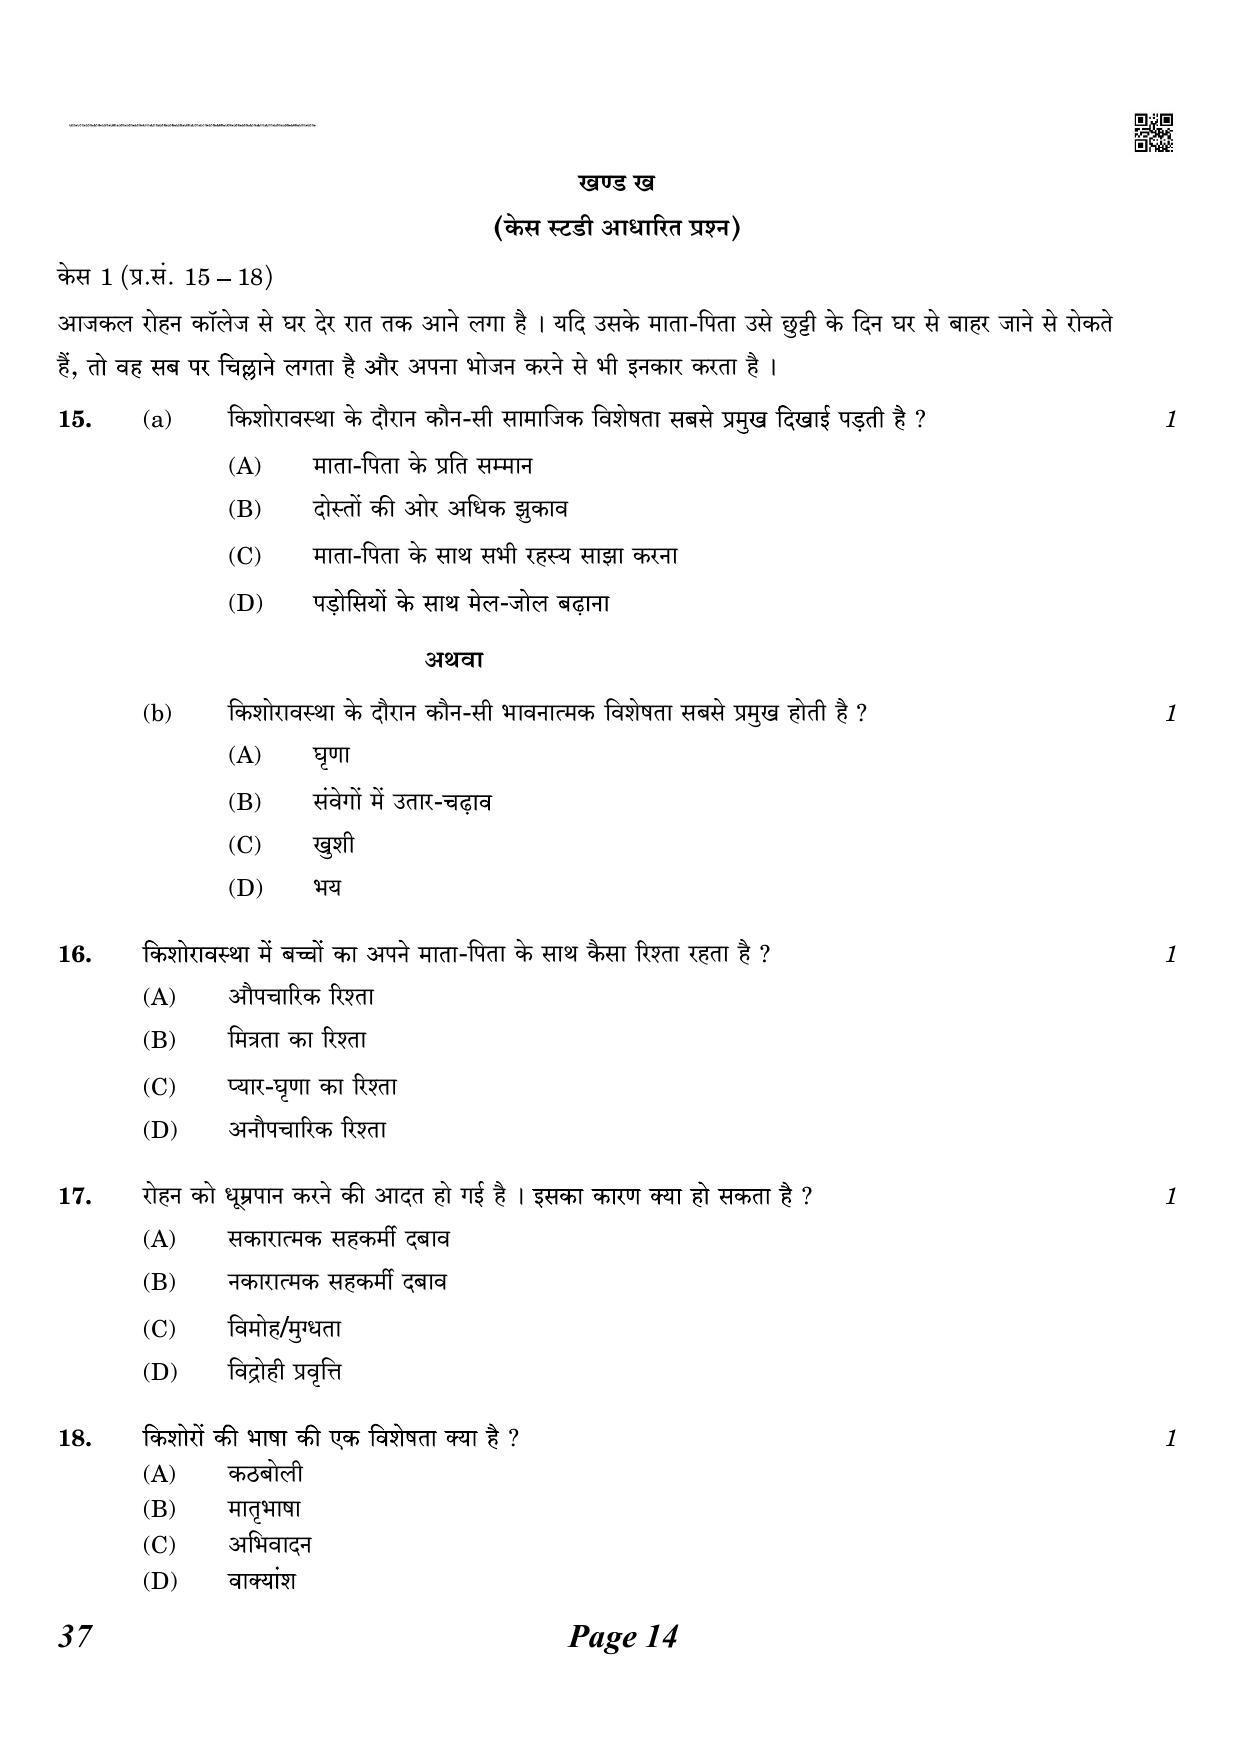 CBSE Class 10 QP_064_Home_Science 2021 Compartment Question Paper - Page 14